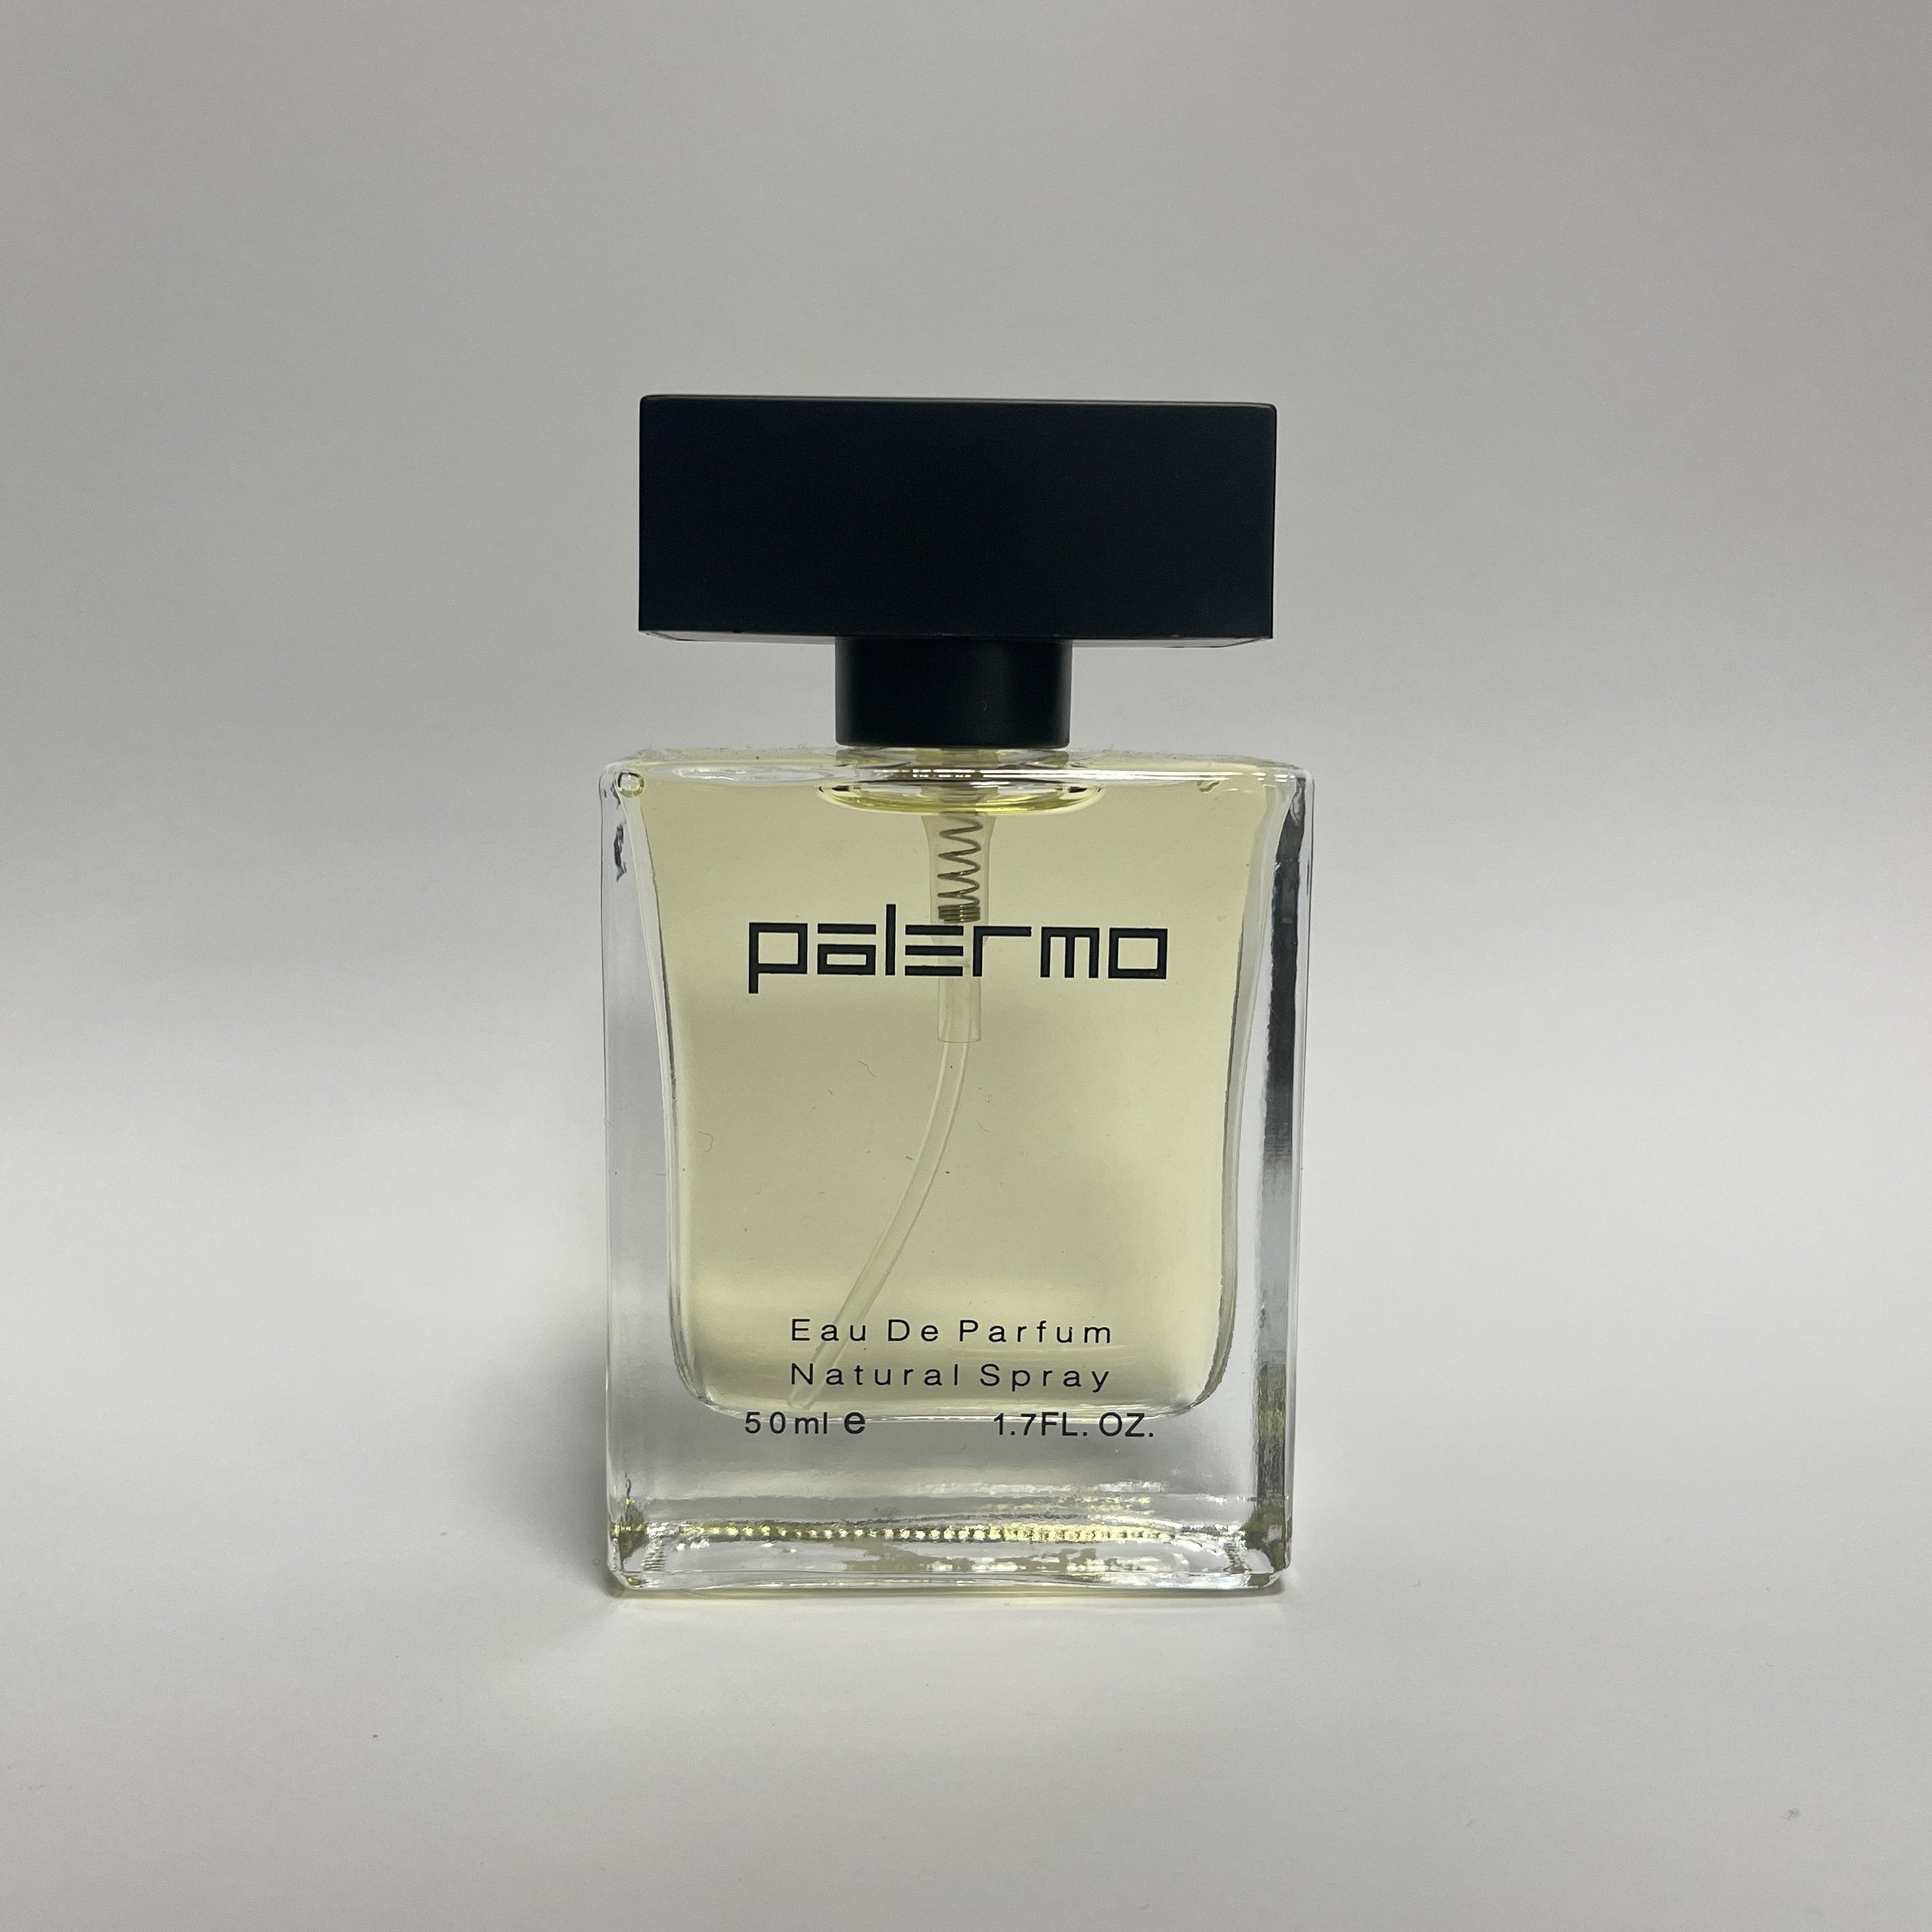 Inspired By ORAGE - LOUIS VUITTON (Mens 595) – Palermo Perfumes